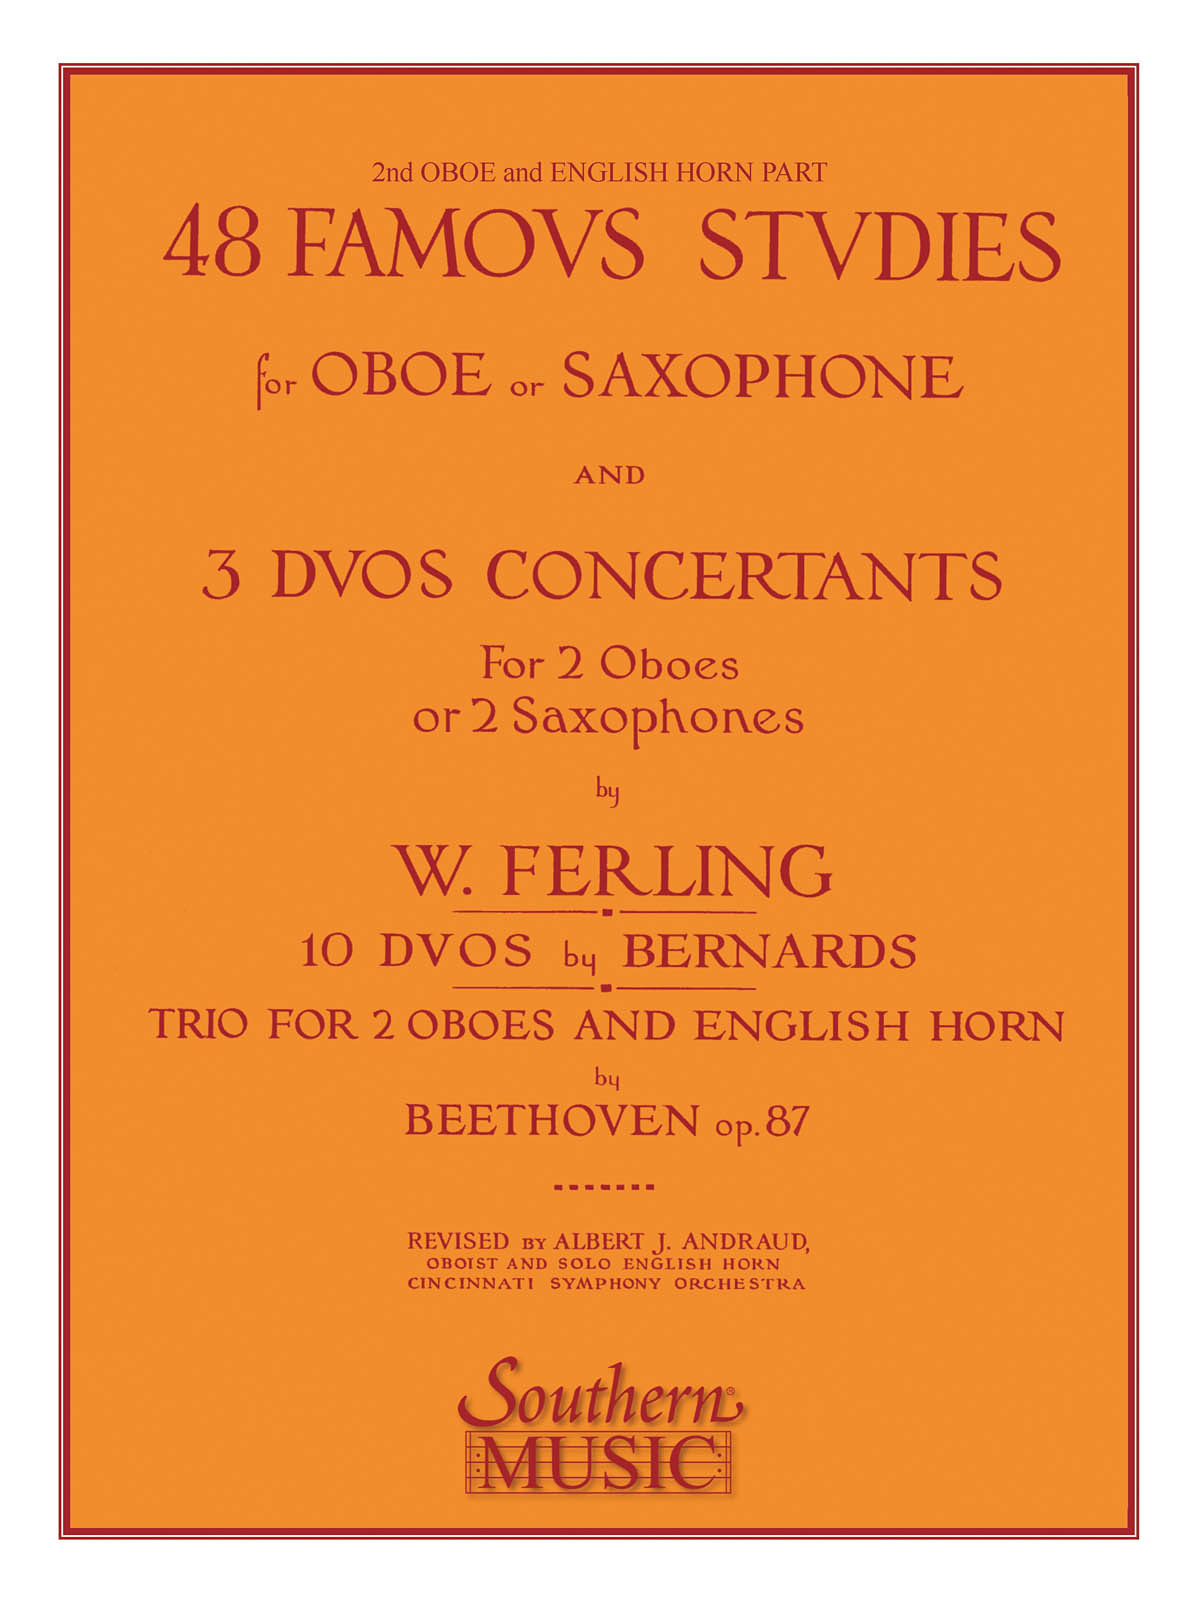 Franz Wilhelm Ferling: 48 Famous Studies (2nd and 3rd Part): Oboe Solo: